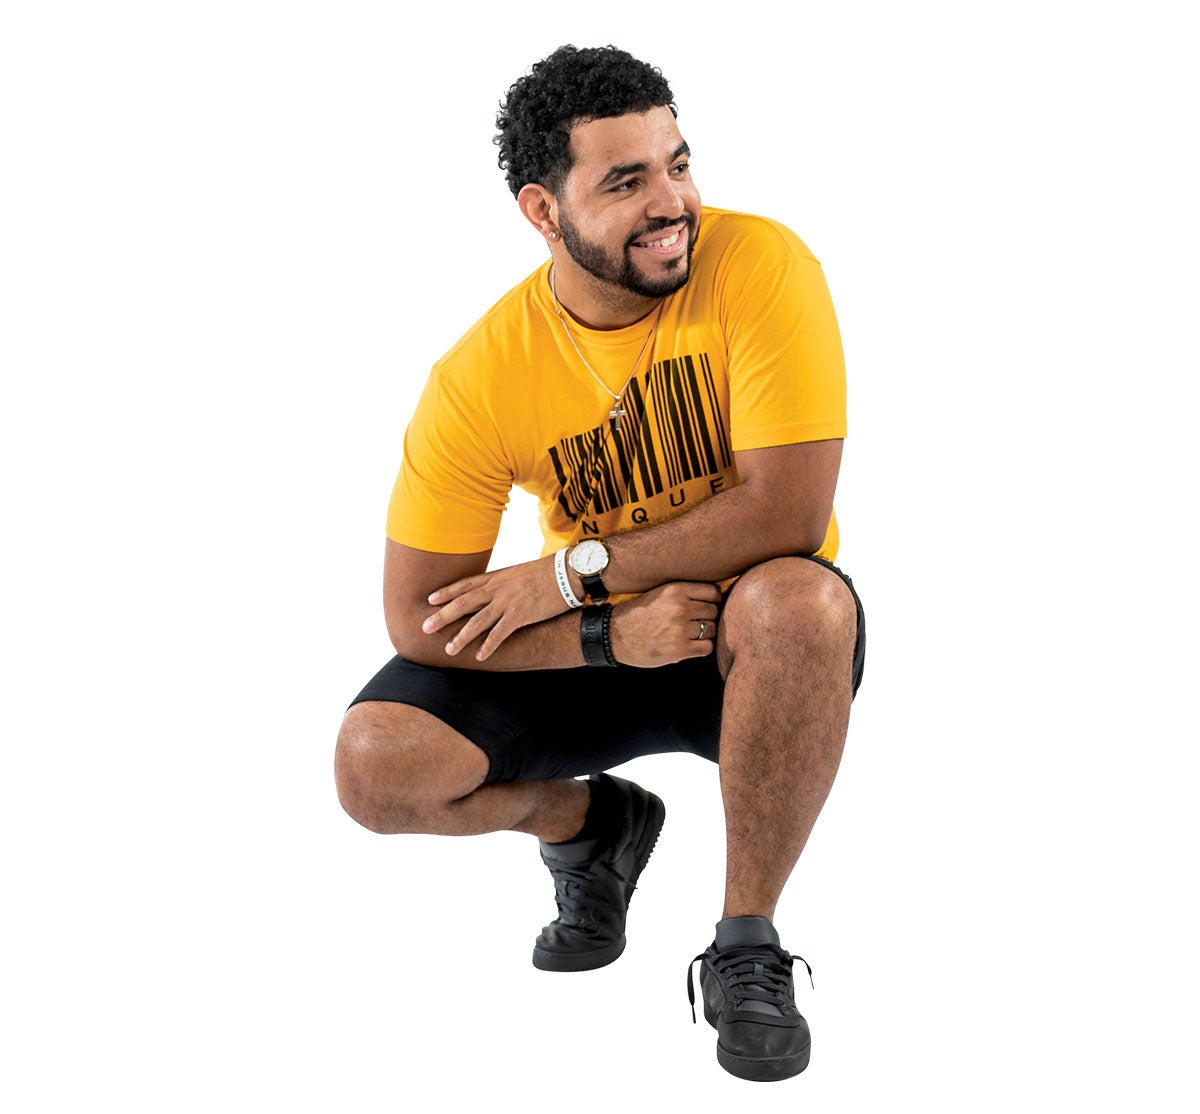 A man in a yellow shirt and black shorts crouches down while he looks to the side and smiles.